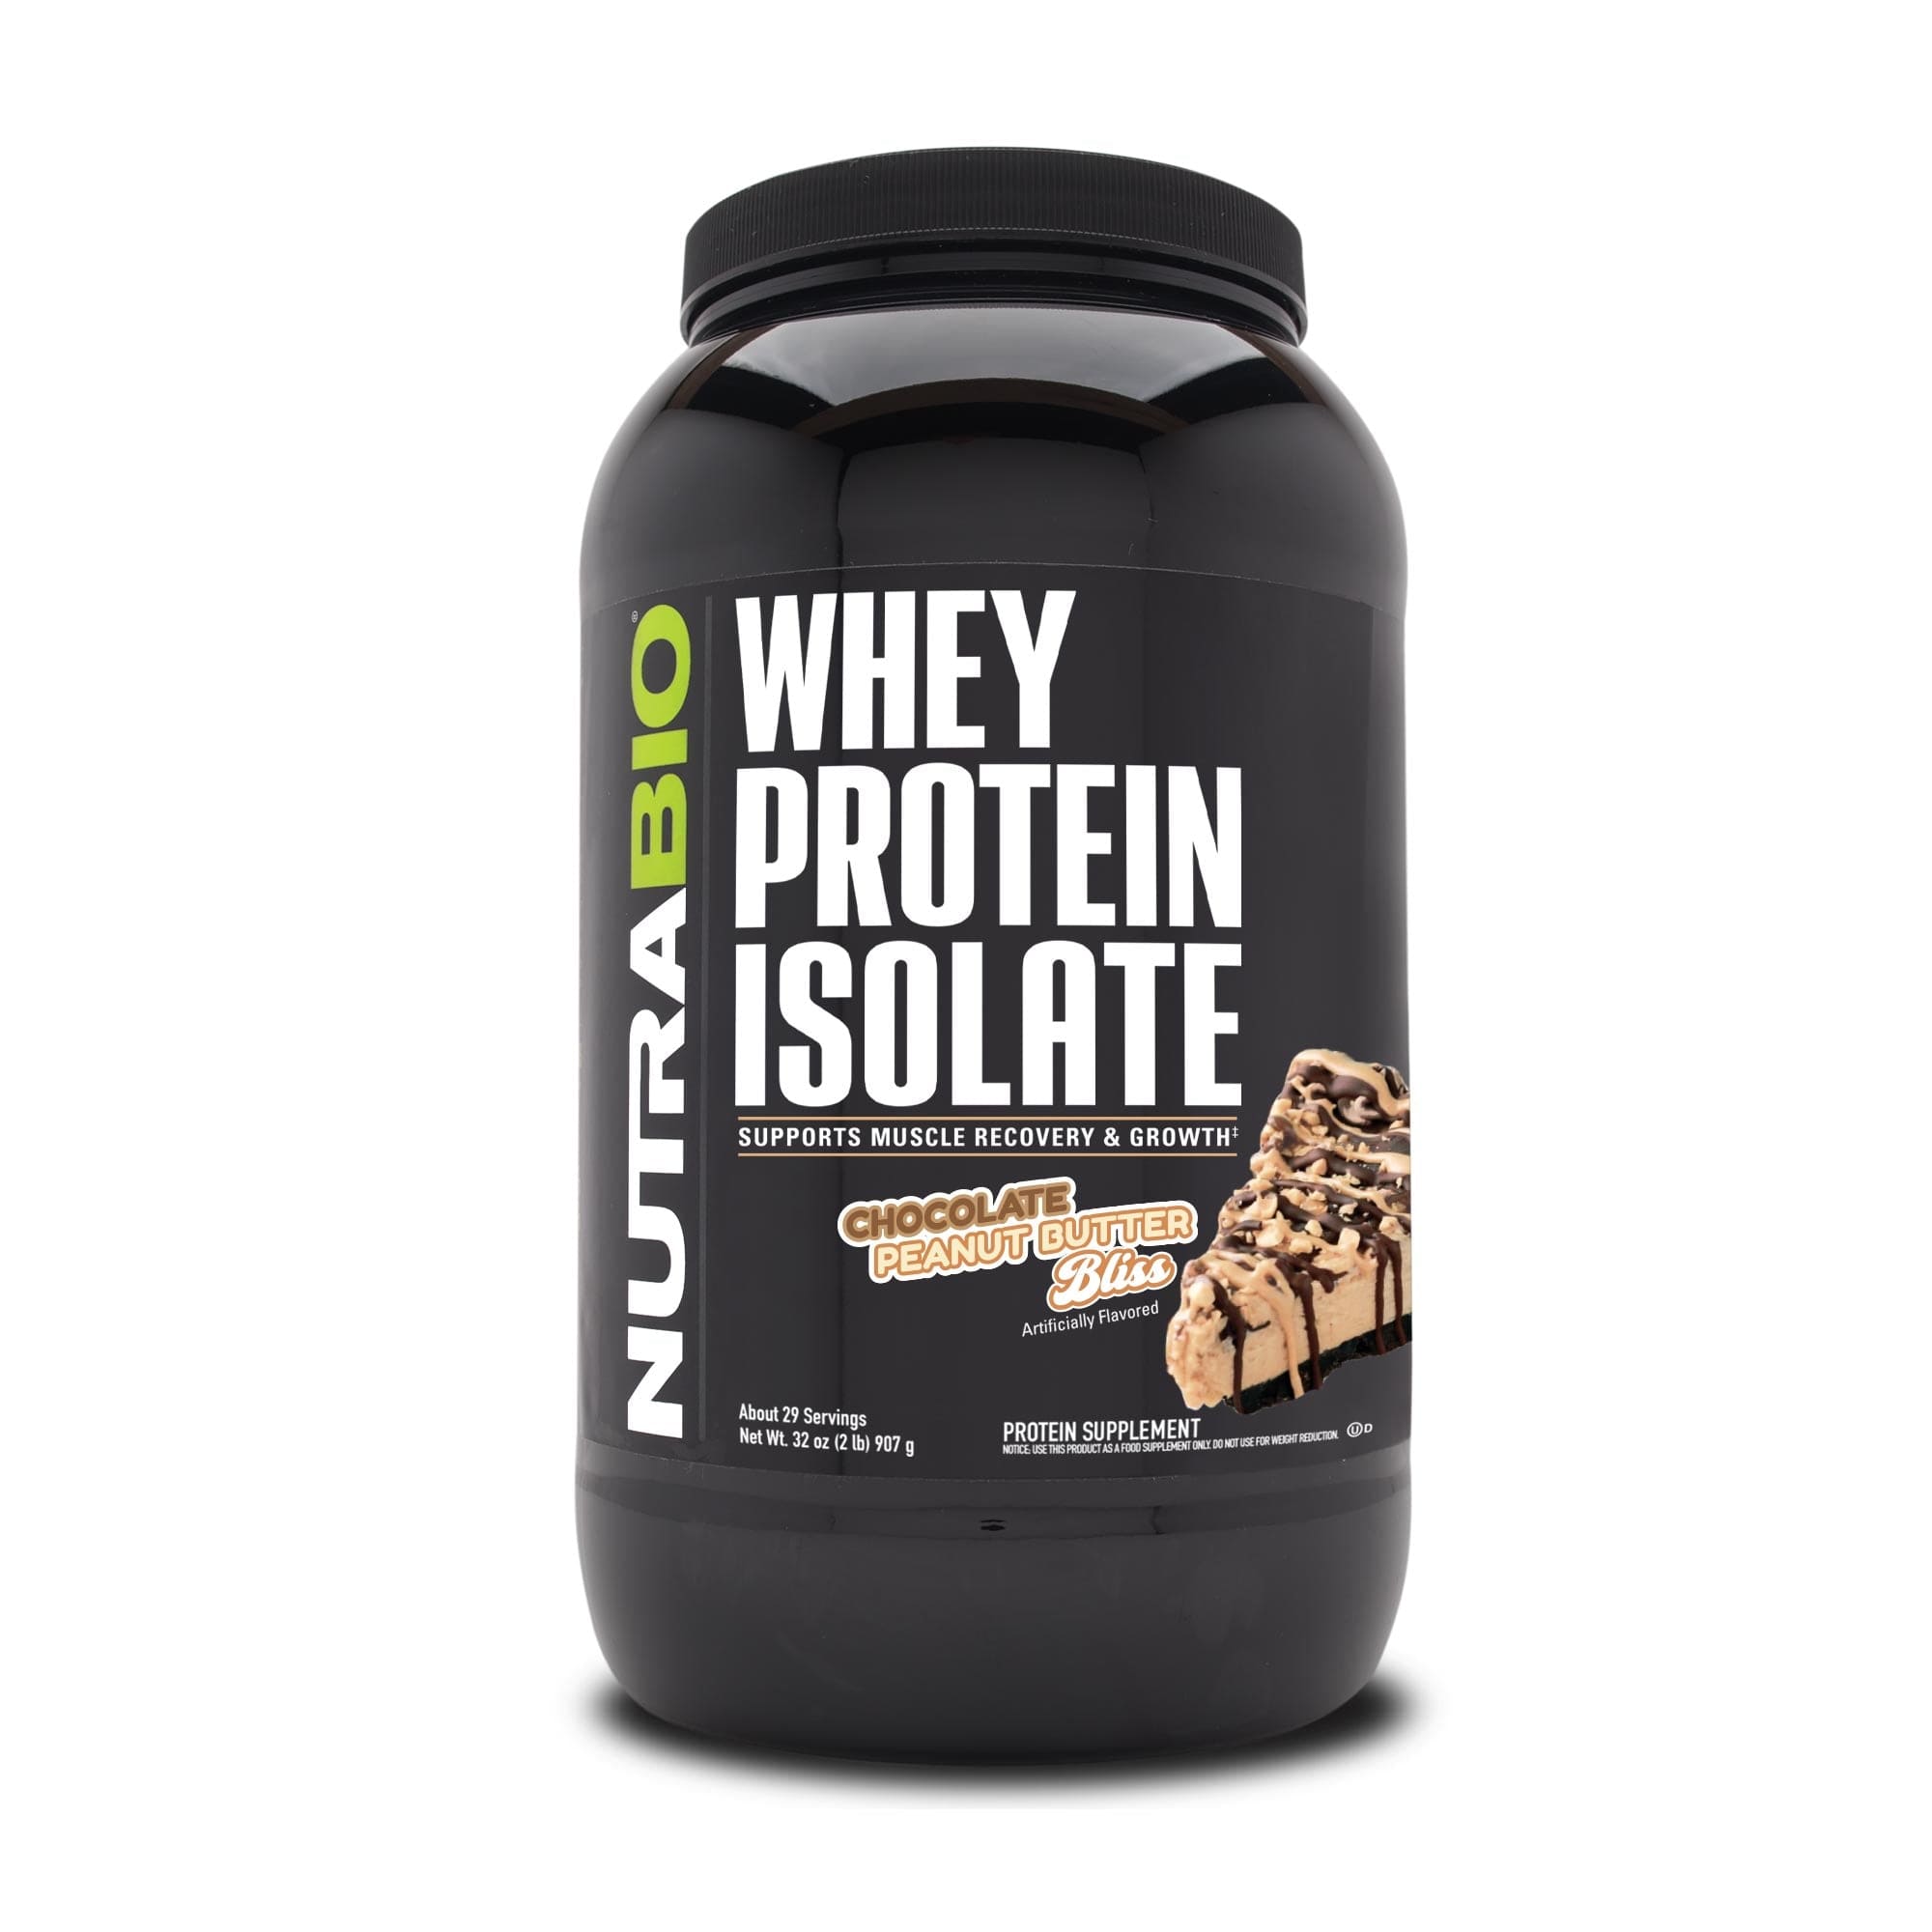 Whey-Protein-Isolate-Chocolate-Peanut-Butter-Bliss.jpg